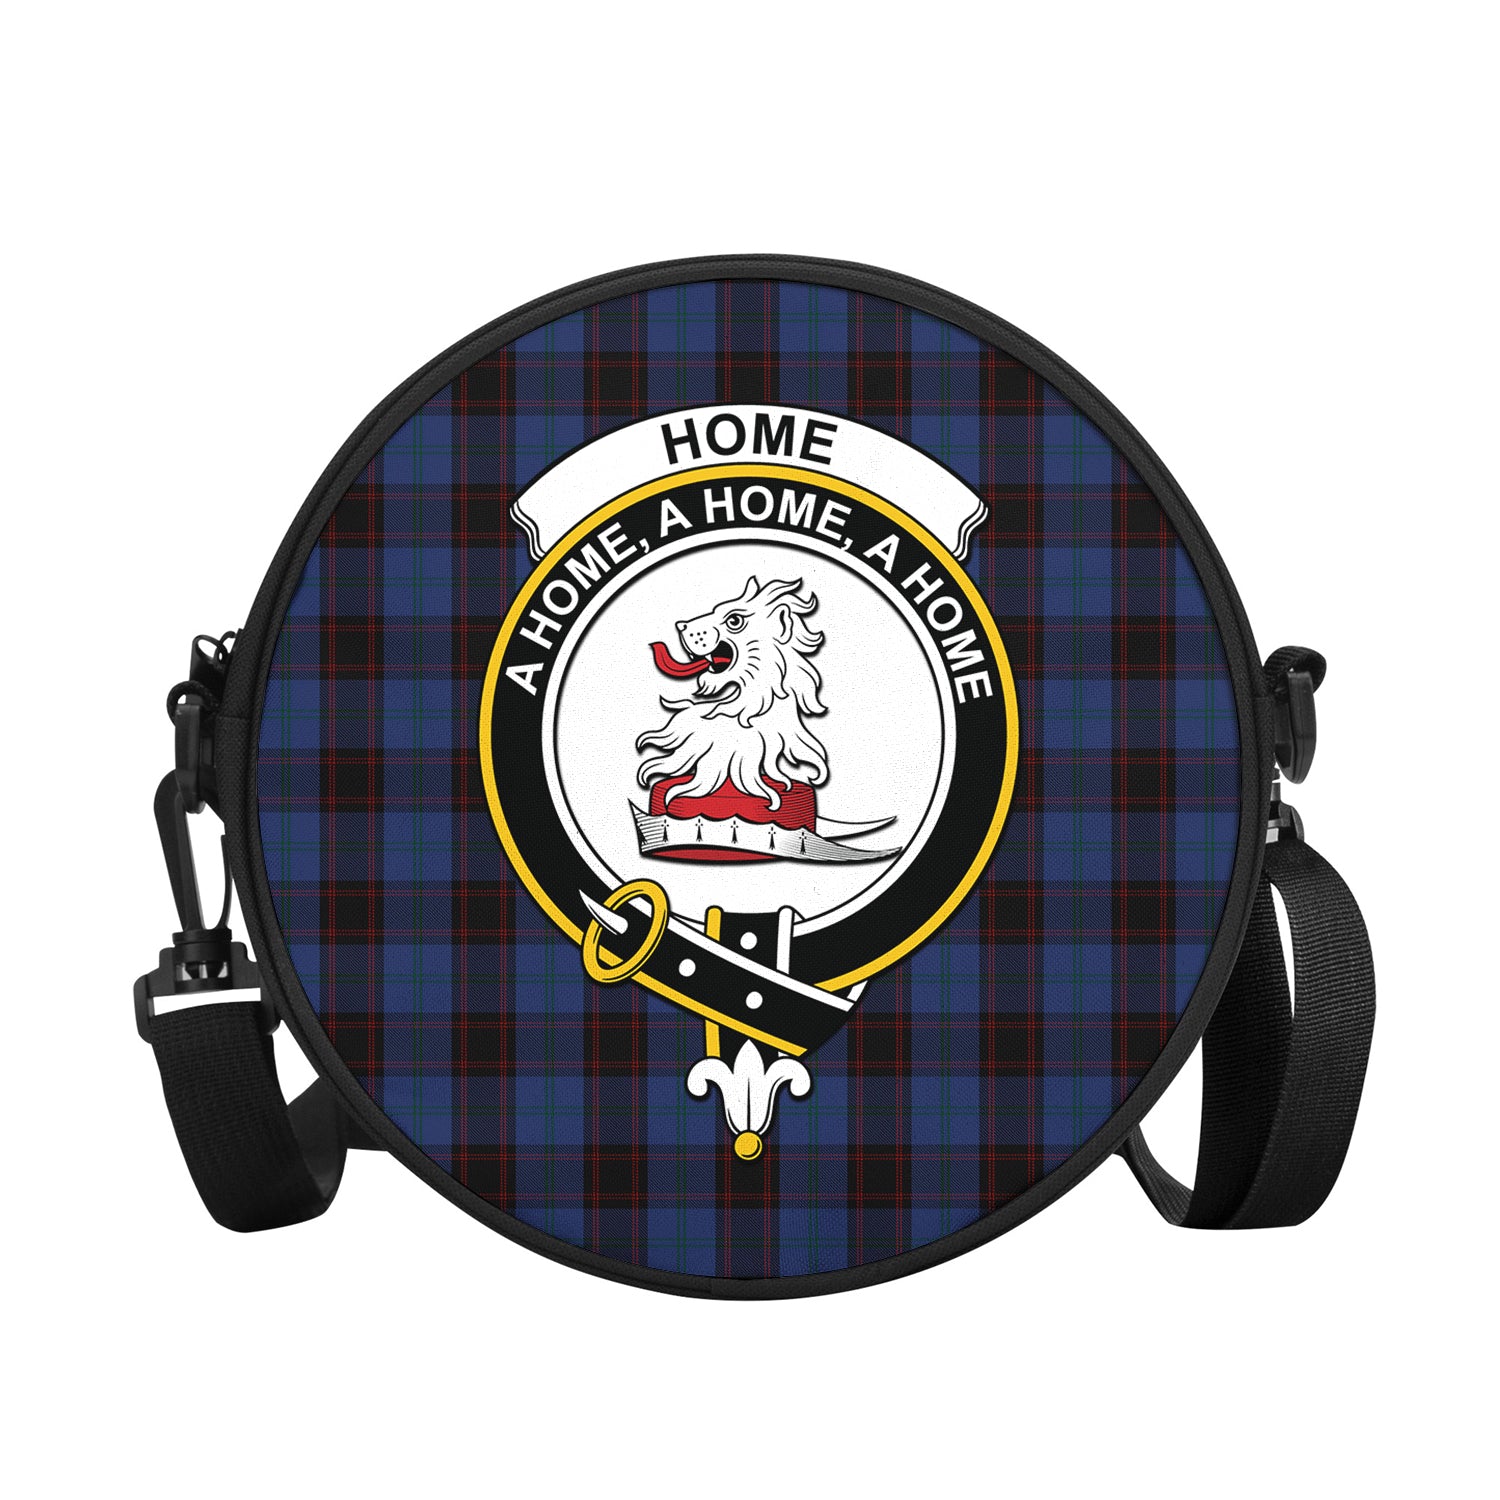 home-hume-tartan-round-satchel-bags-with-family-crest